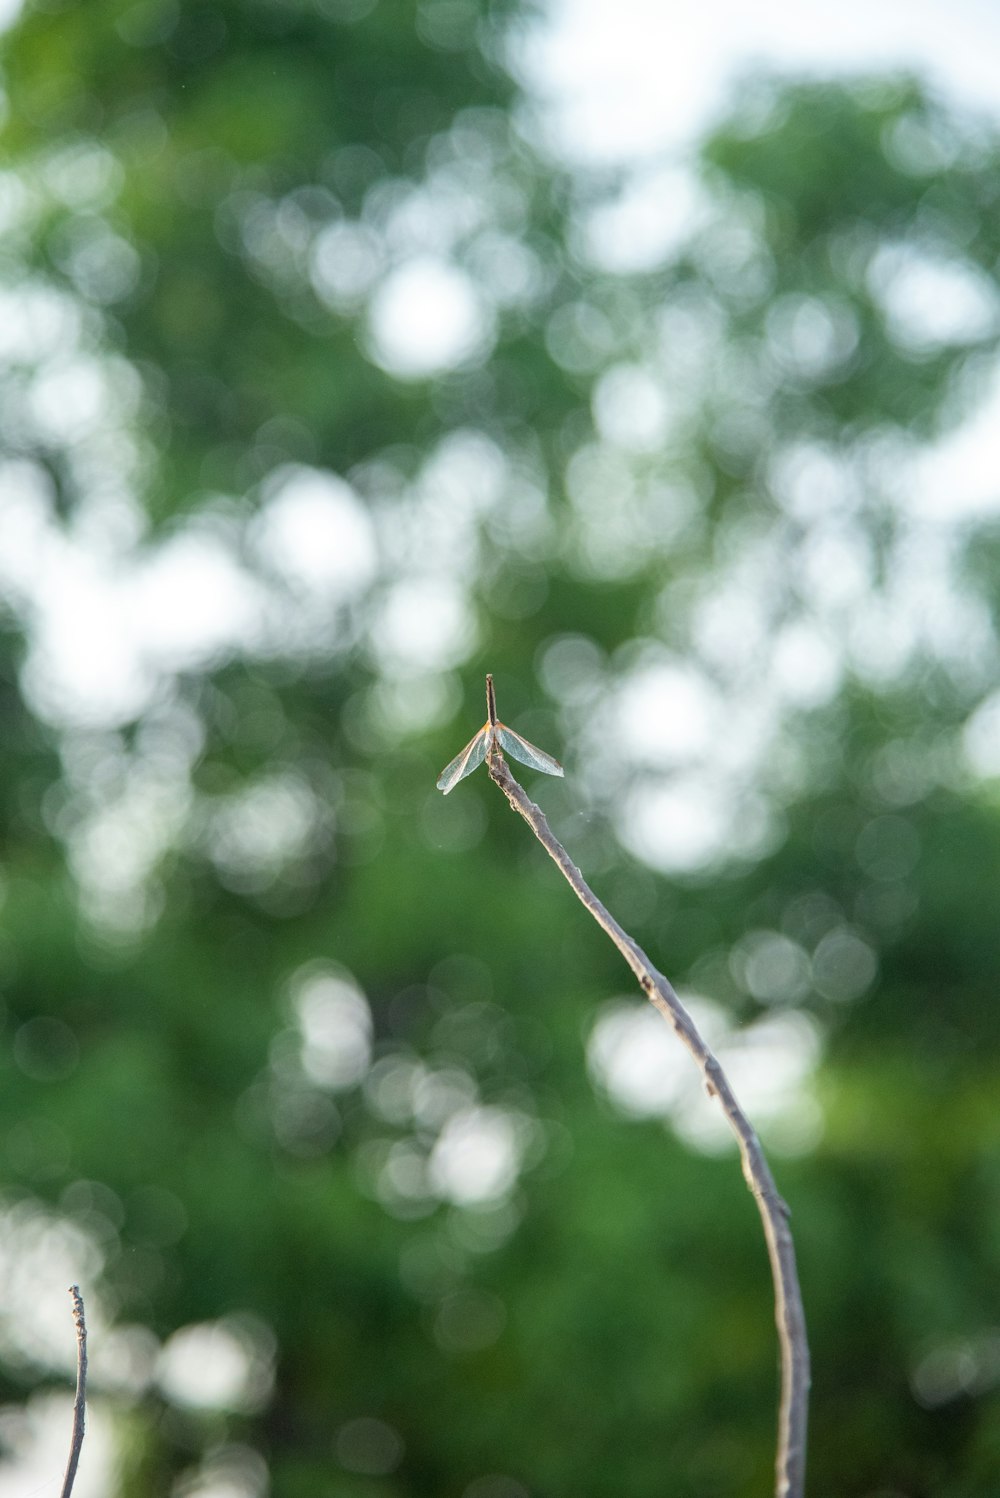 a branch with a small insect on it